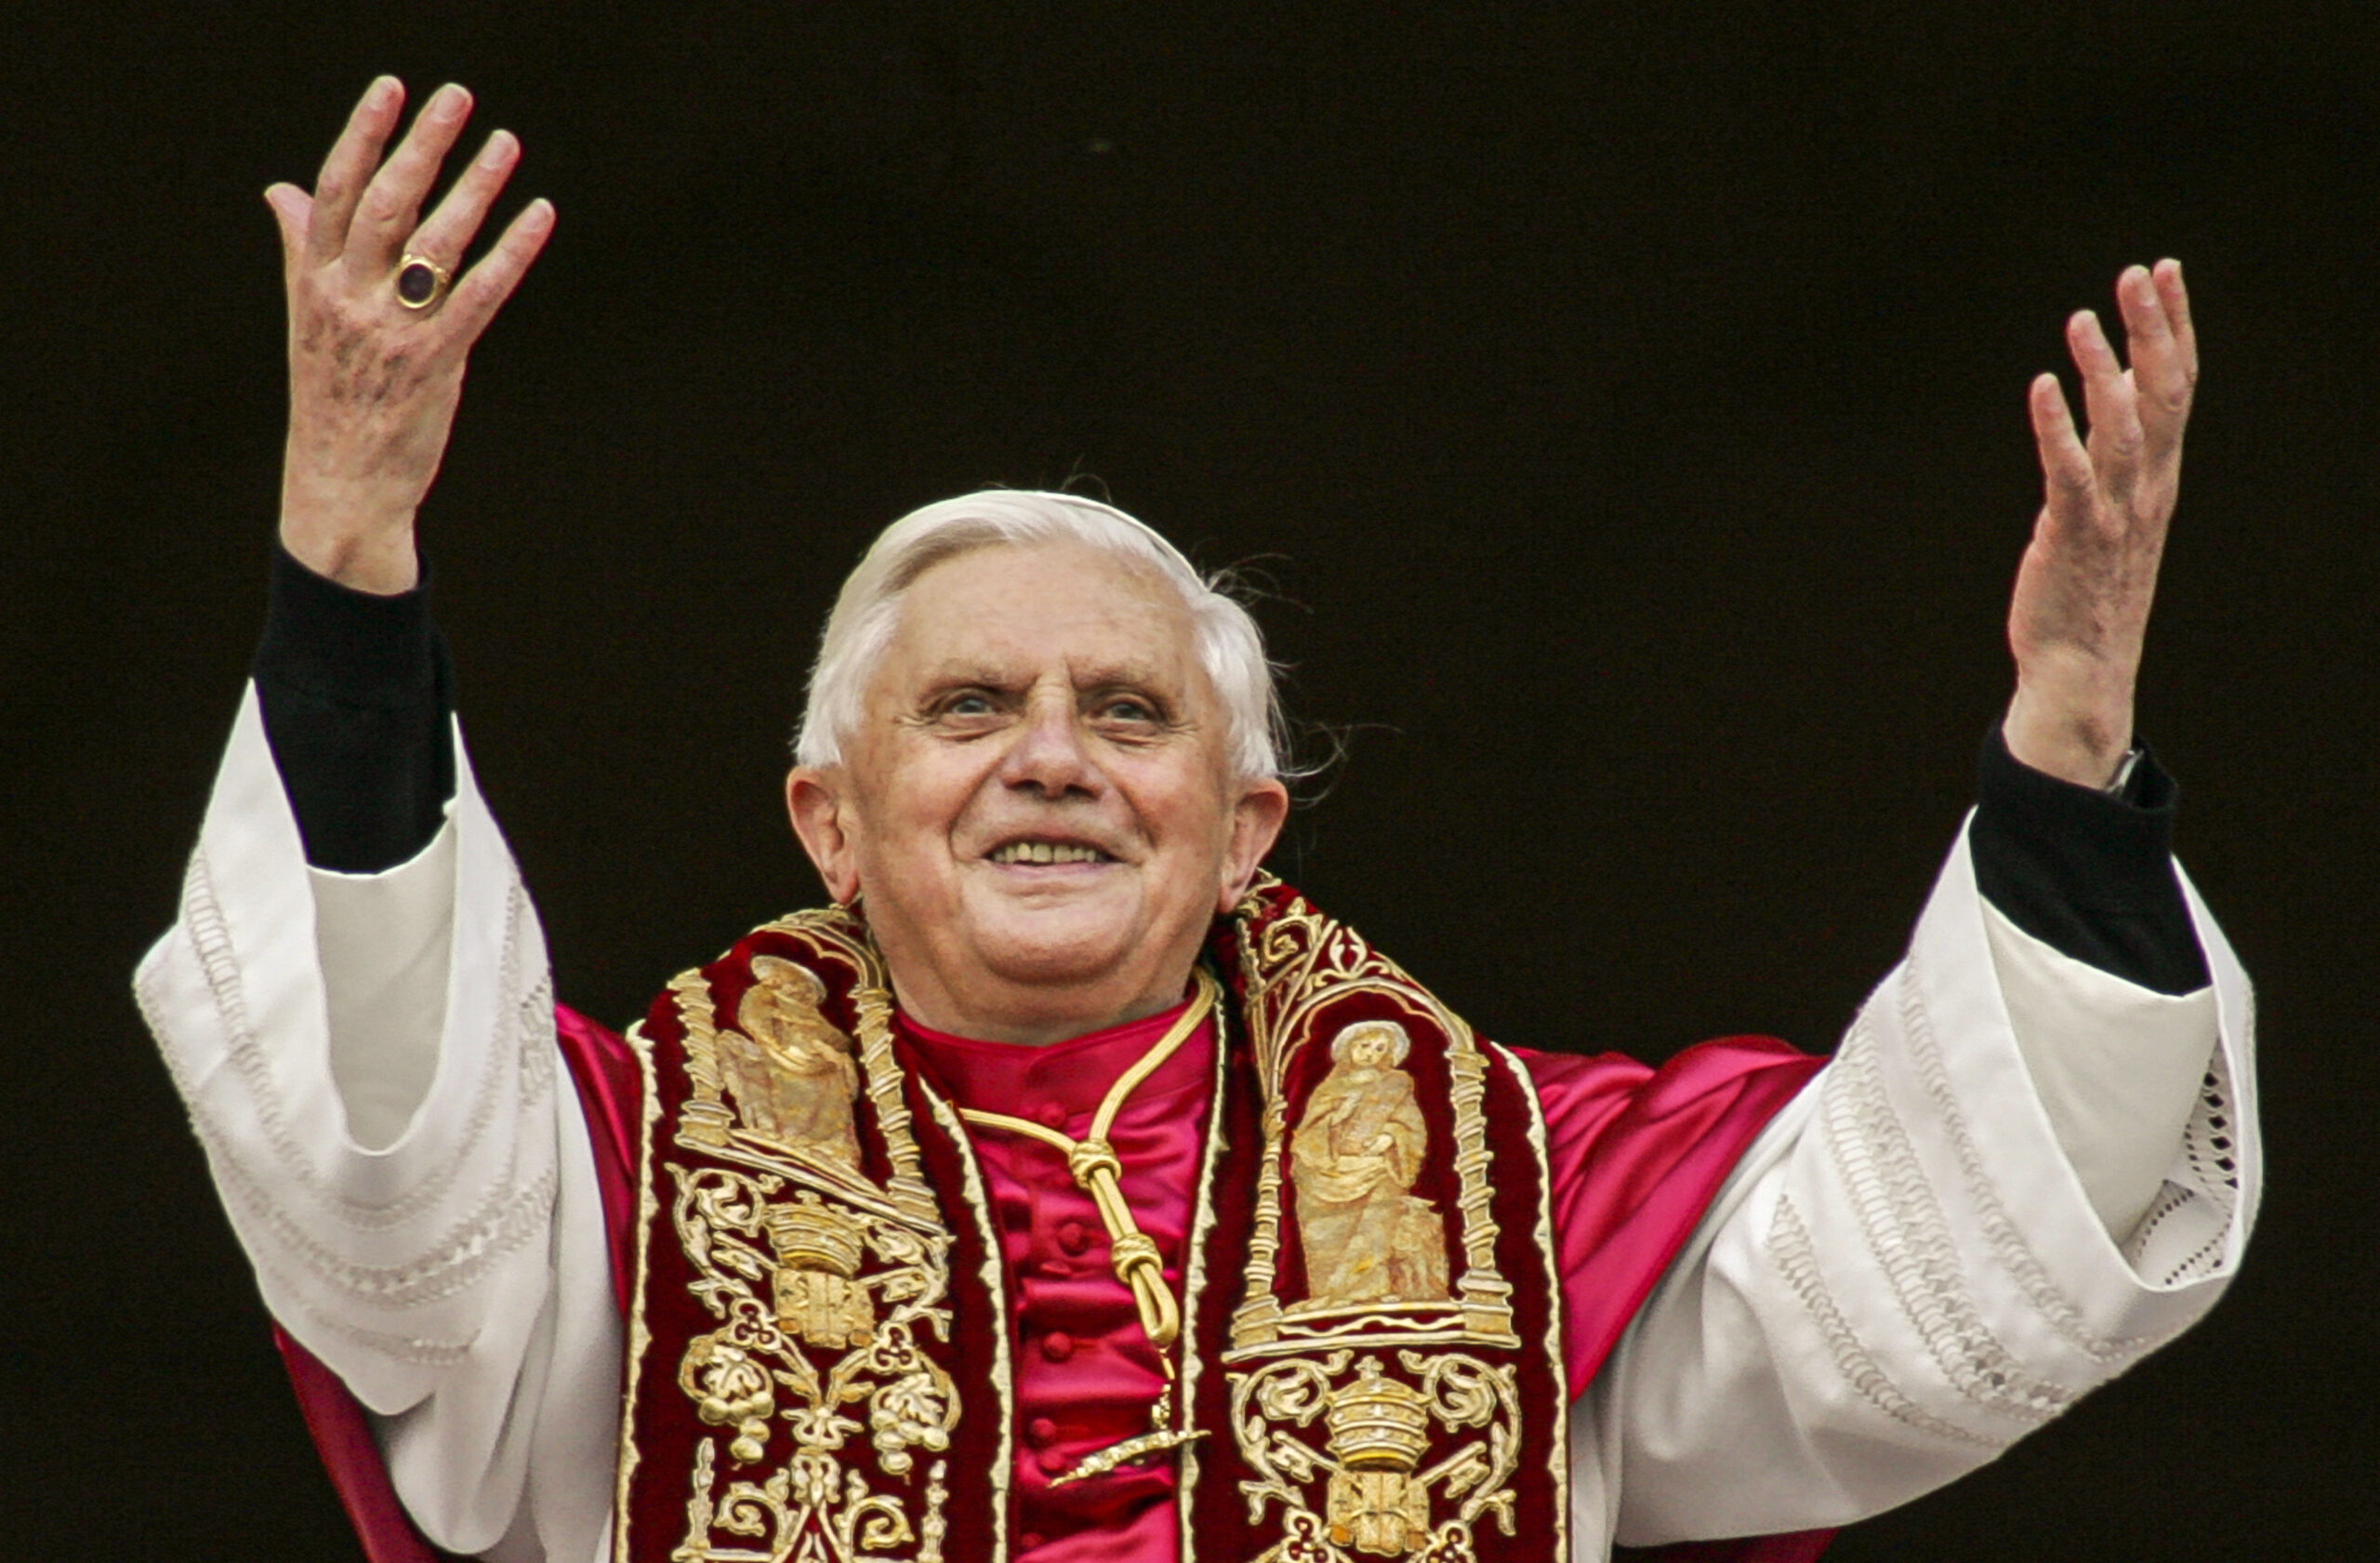 Pope Benedict XVI greets the crowd from the central balcony of St. Peter's Basilica at the Vatican on April 19, 2005, soon after his election. (AP Photo/Andrew Medichini, File)